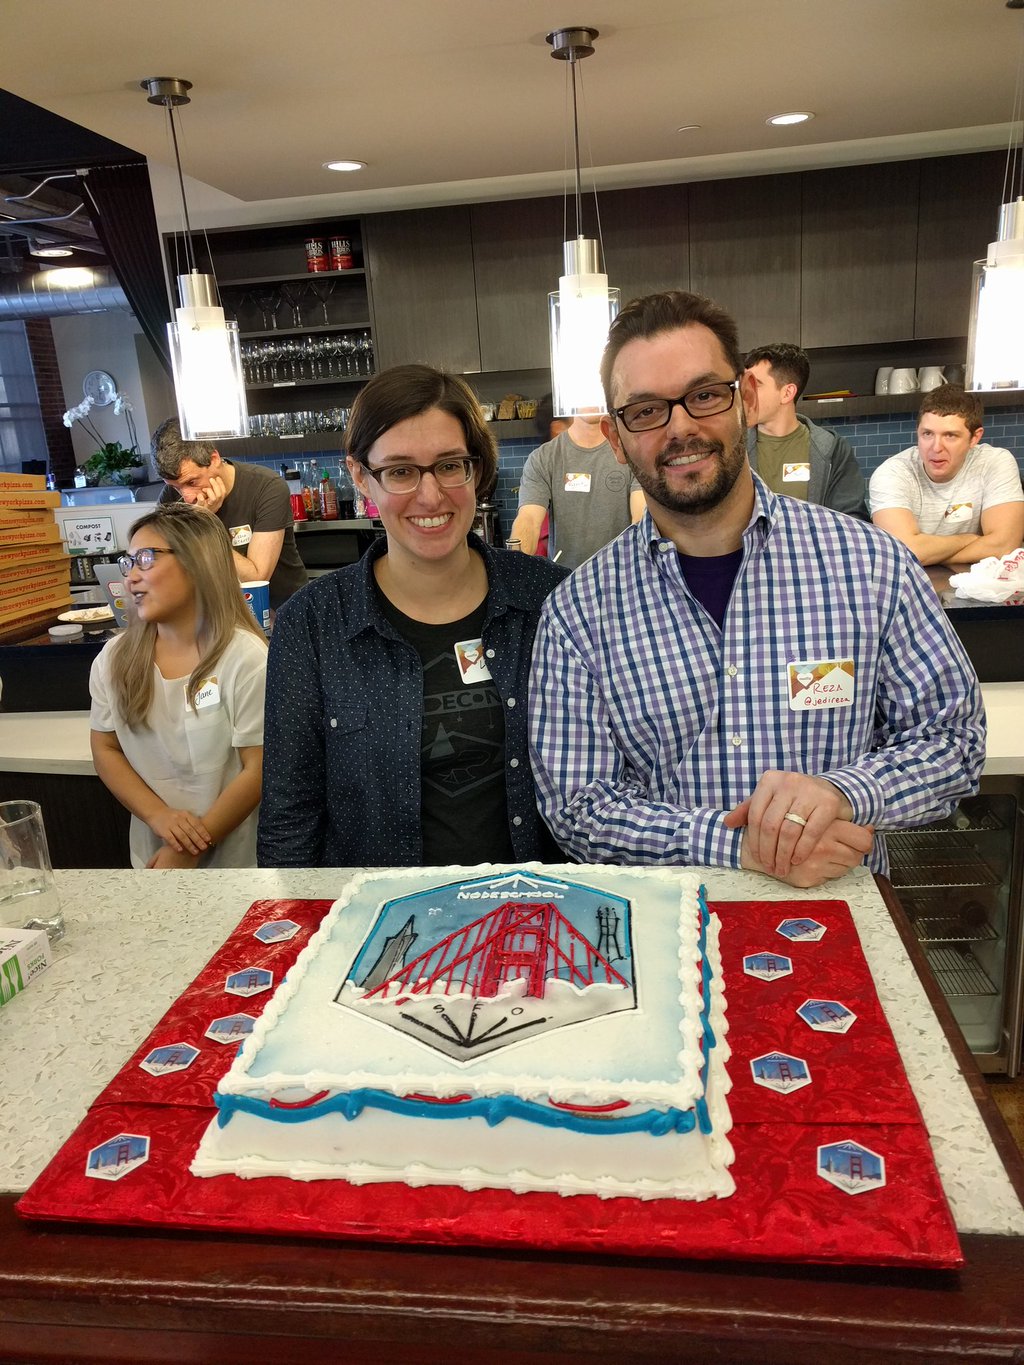 a picture of myself with Reza Akhavan and the awesome cake shaped like our sticker logo that we had for the meetup on the 1 year anniversary of NodeSchool SF